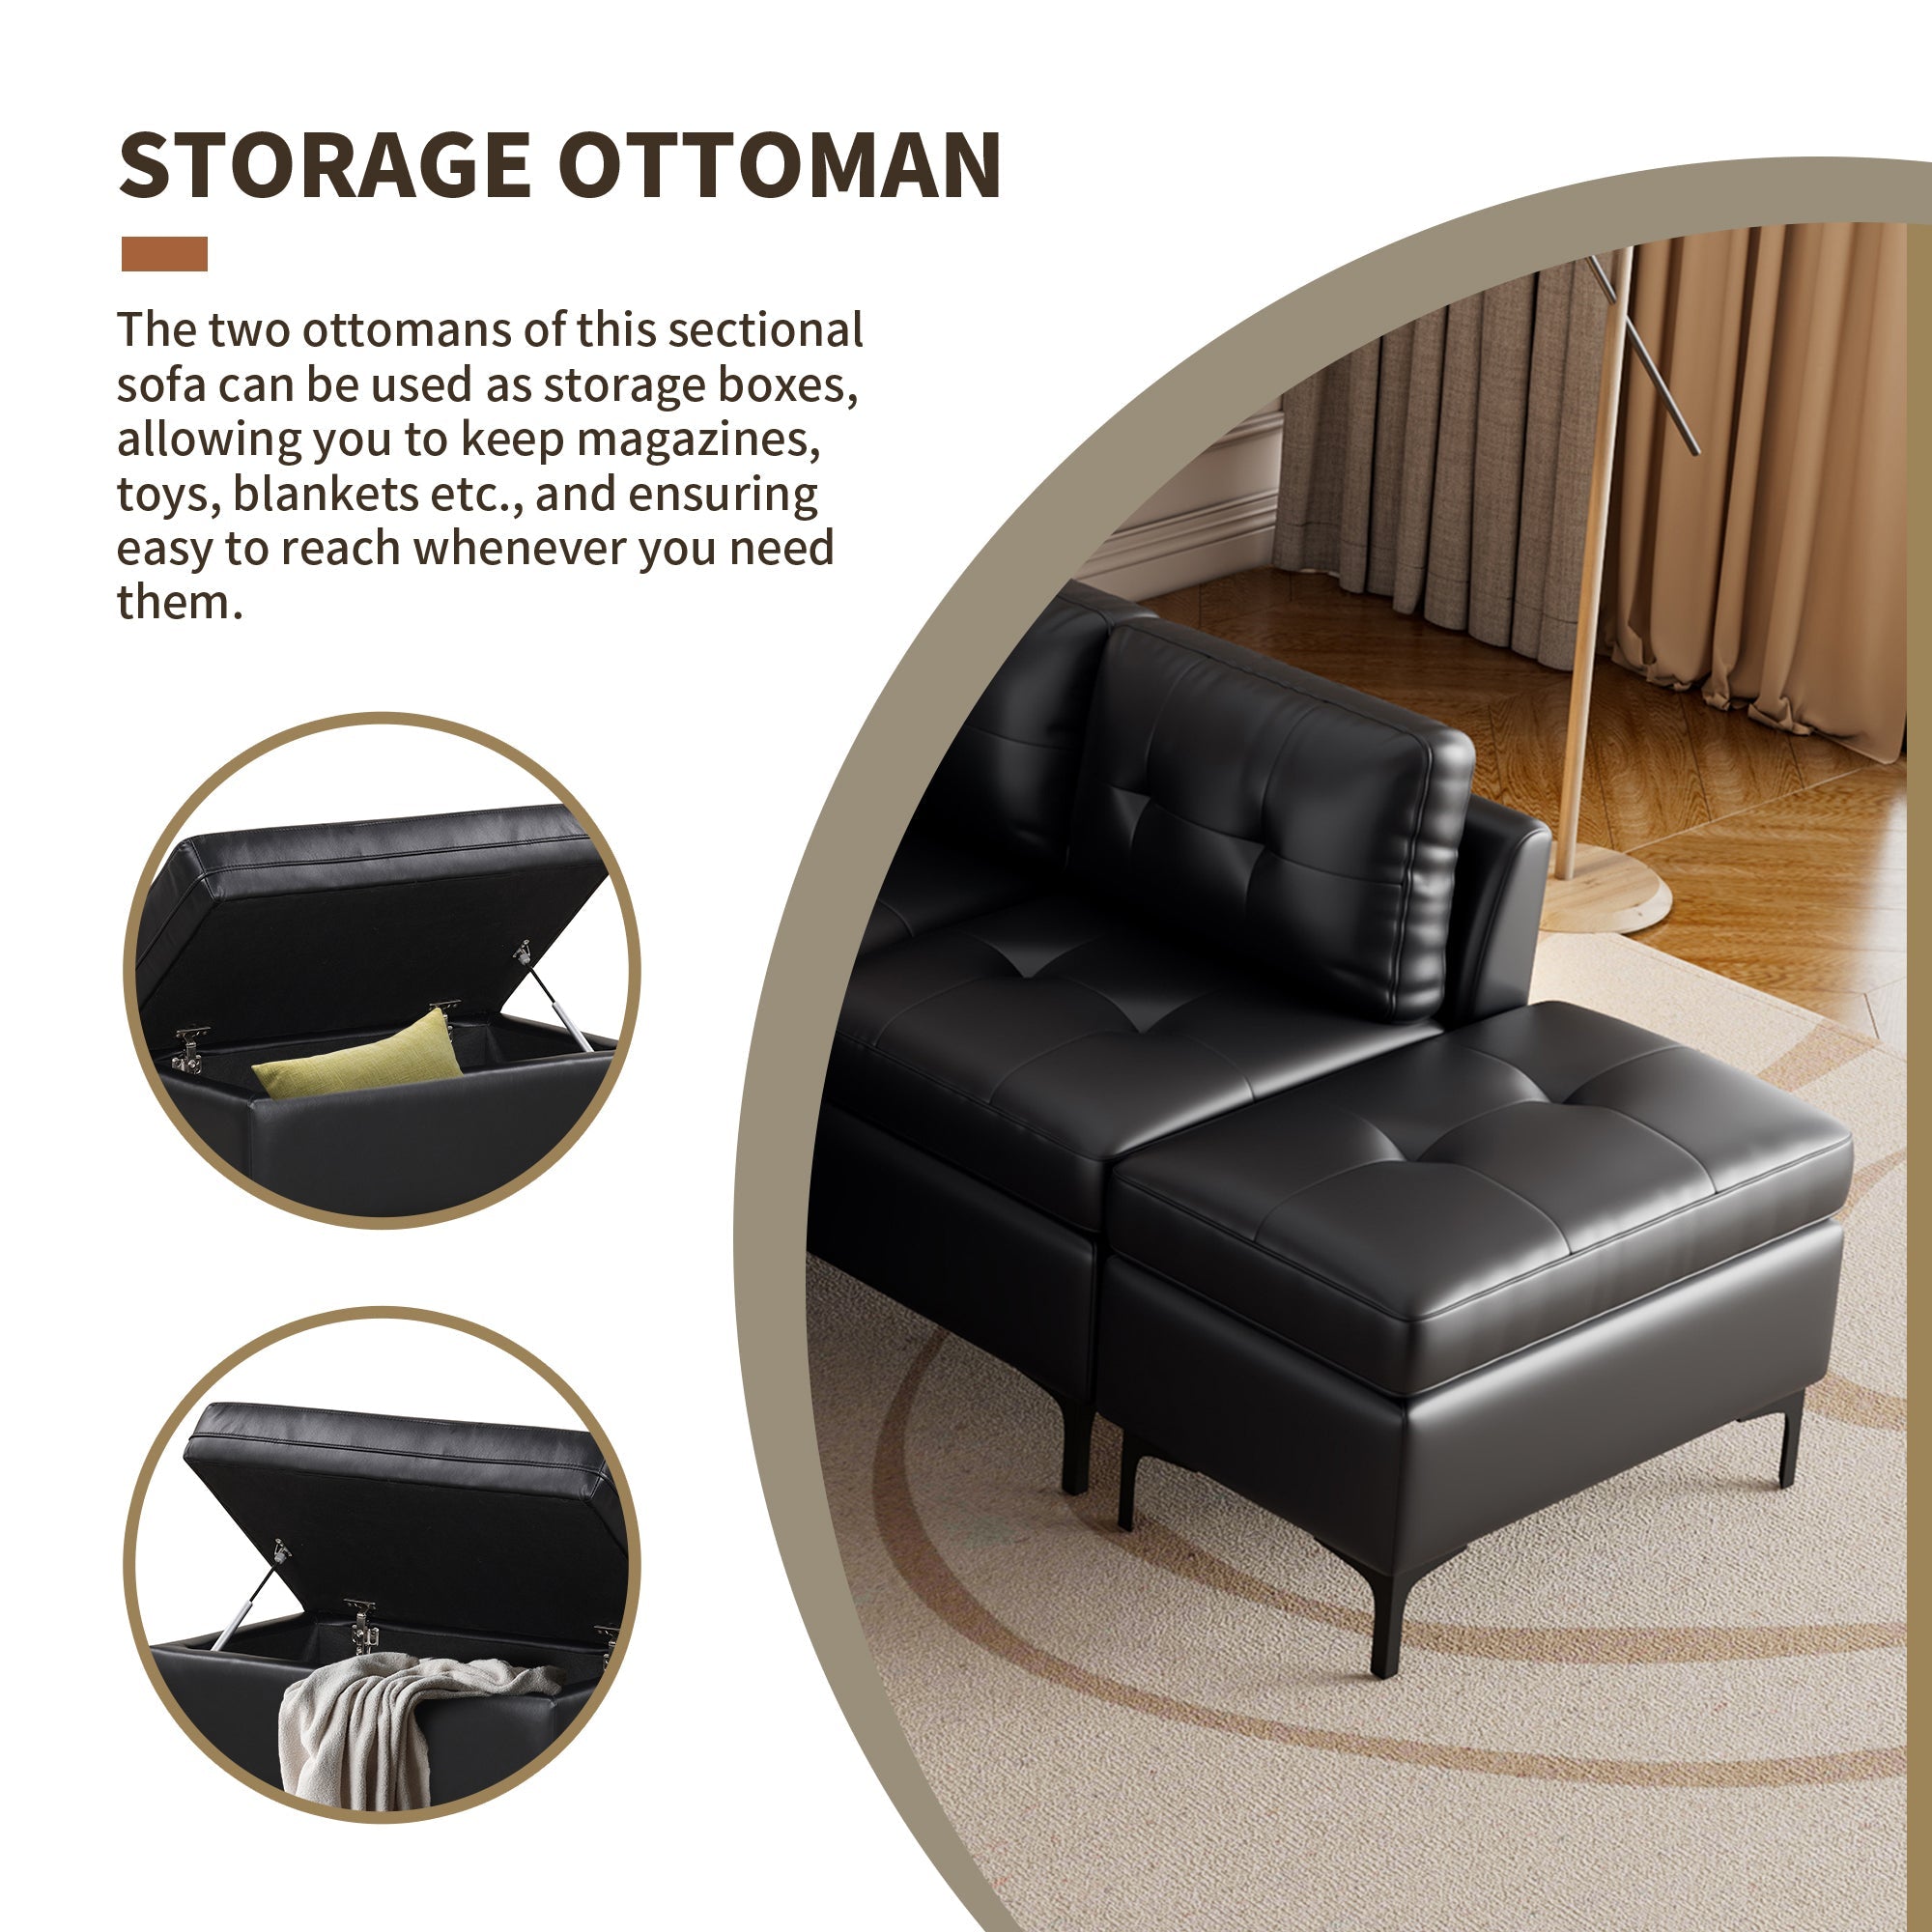 Black Faux Leather L-Shaped Sectional Sofa with Storage Ottomans-Stationary Sectionals-American Furniture Outlet